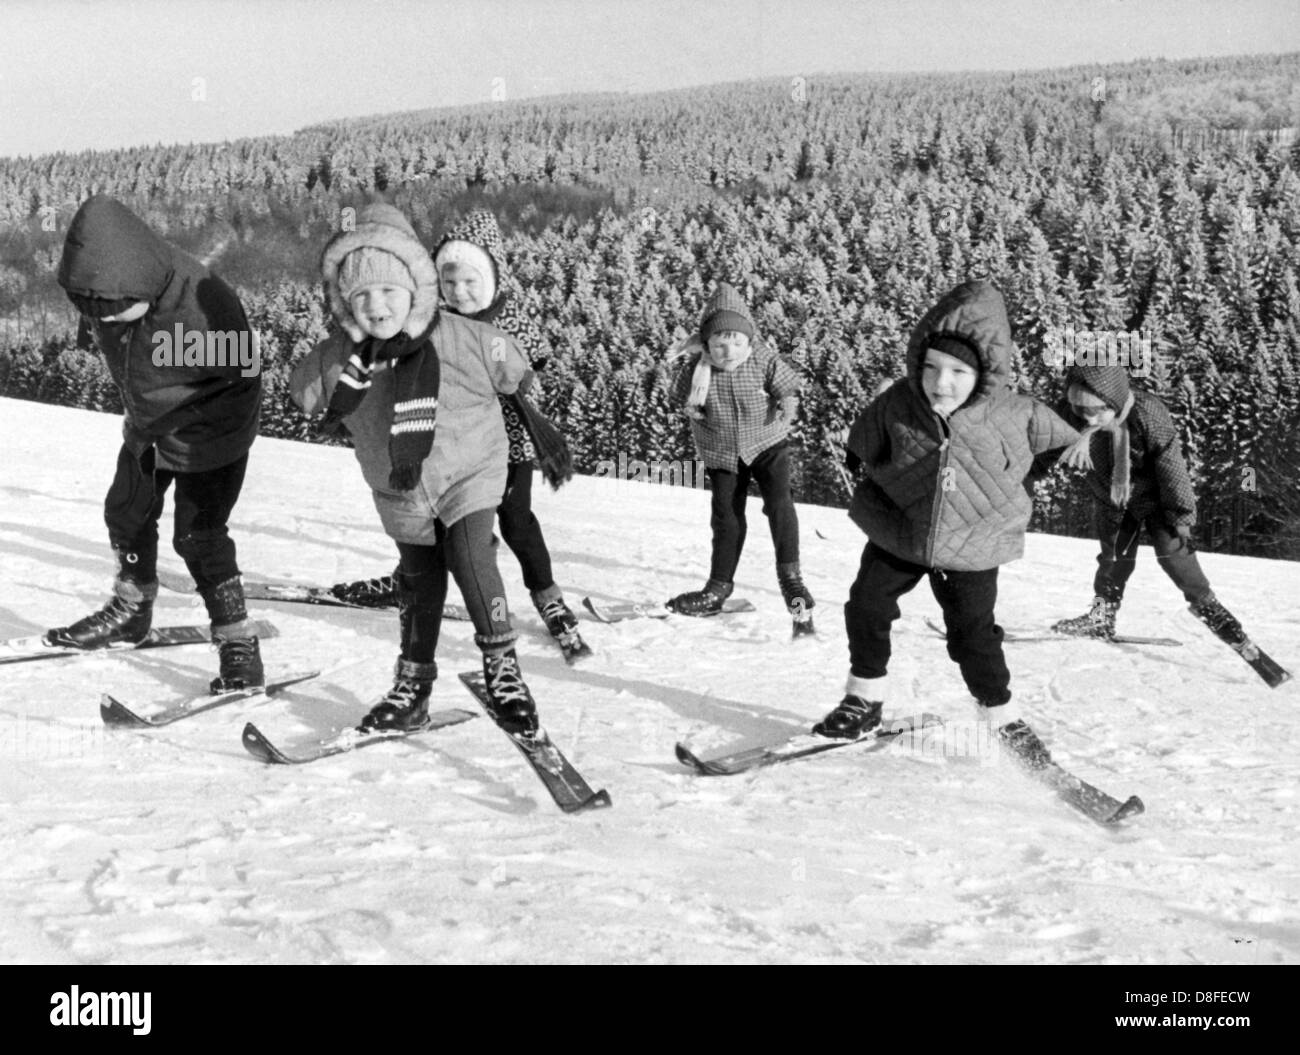 10 Contergan affected children from Iserlohn (Germany), learn how to ski in January 1968 in the Sauerland area in Germany. The experimental exercise, which is conducted by the Iserlohn Workers' Welfare Association at a children's home near Schürfelde (Meinertzhagen, Germany), aims to test new active exercise therapies. The school aged children are attended to by a physical therapist and a ski instructor. Stock Photo